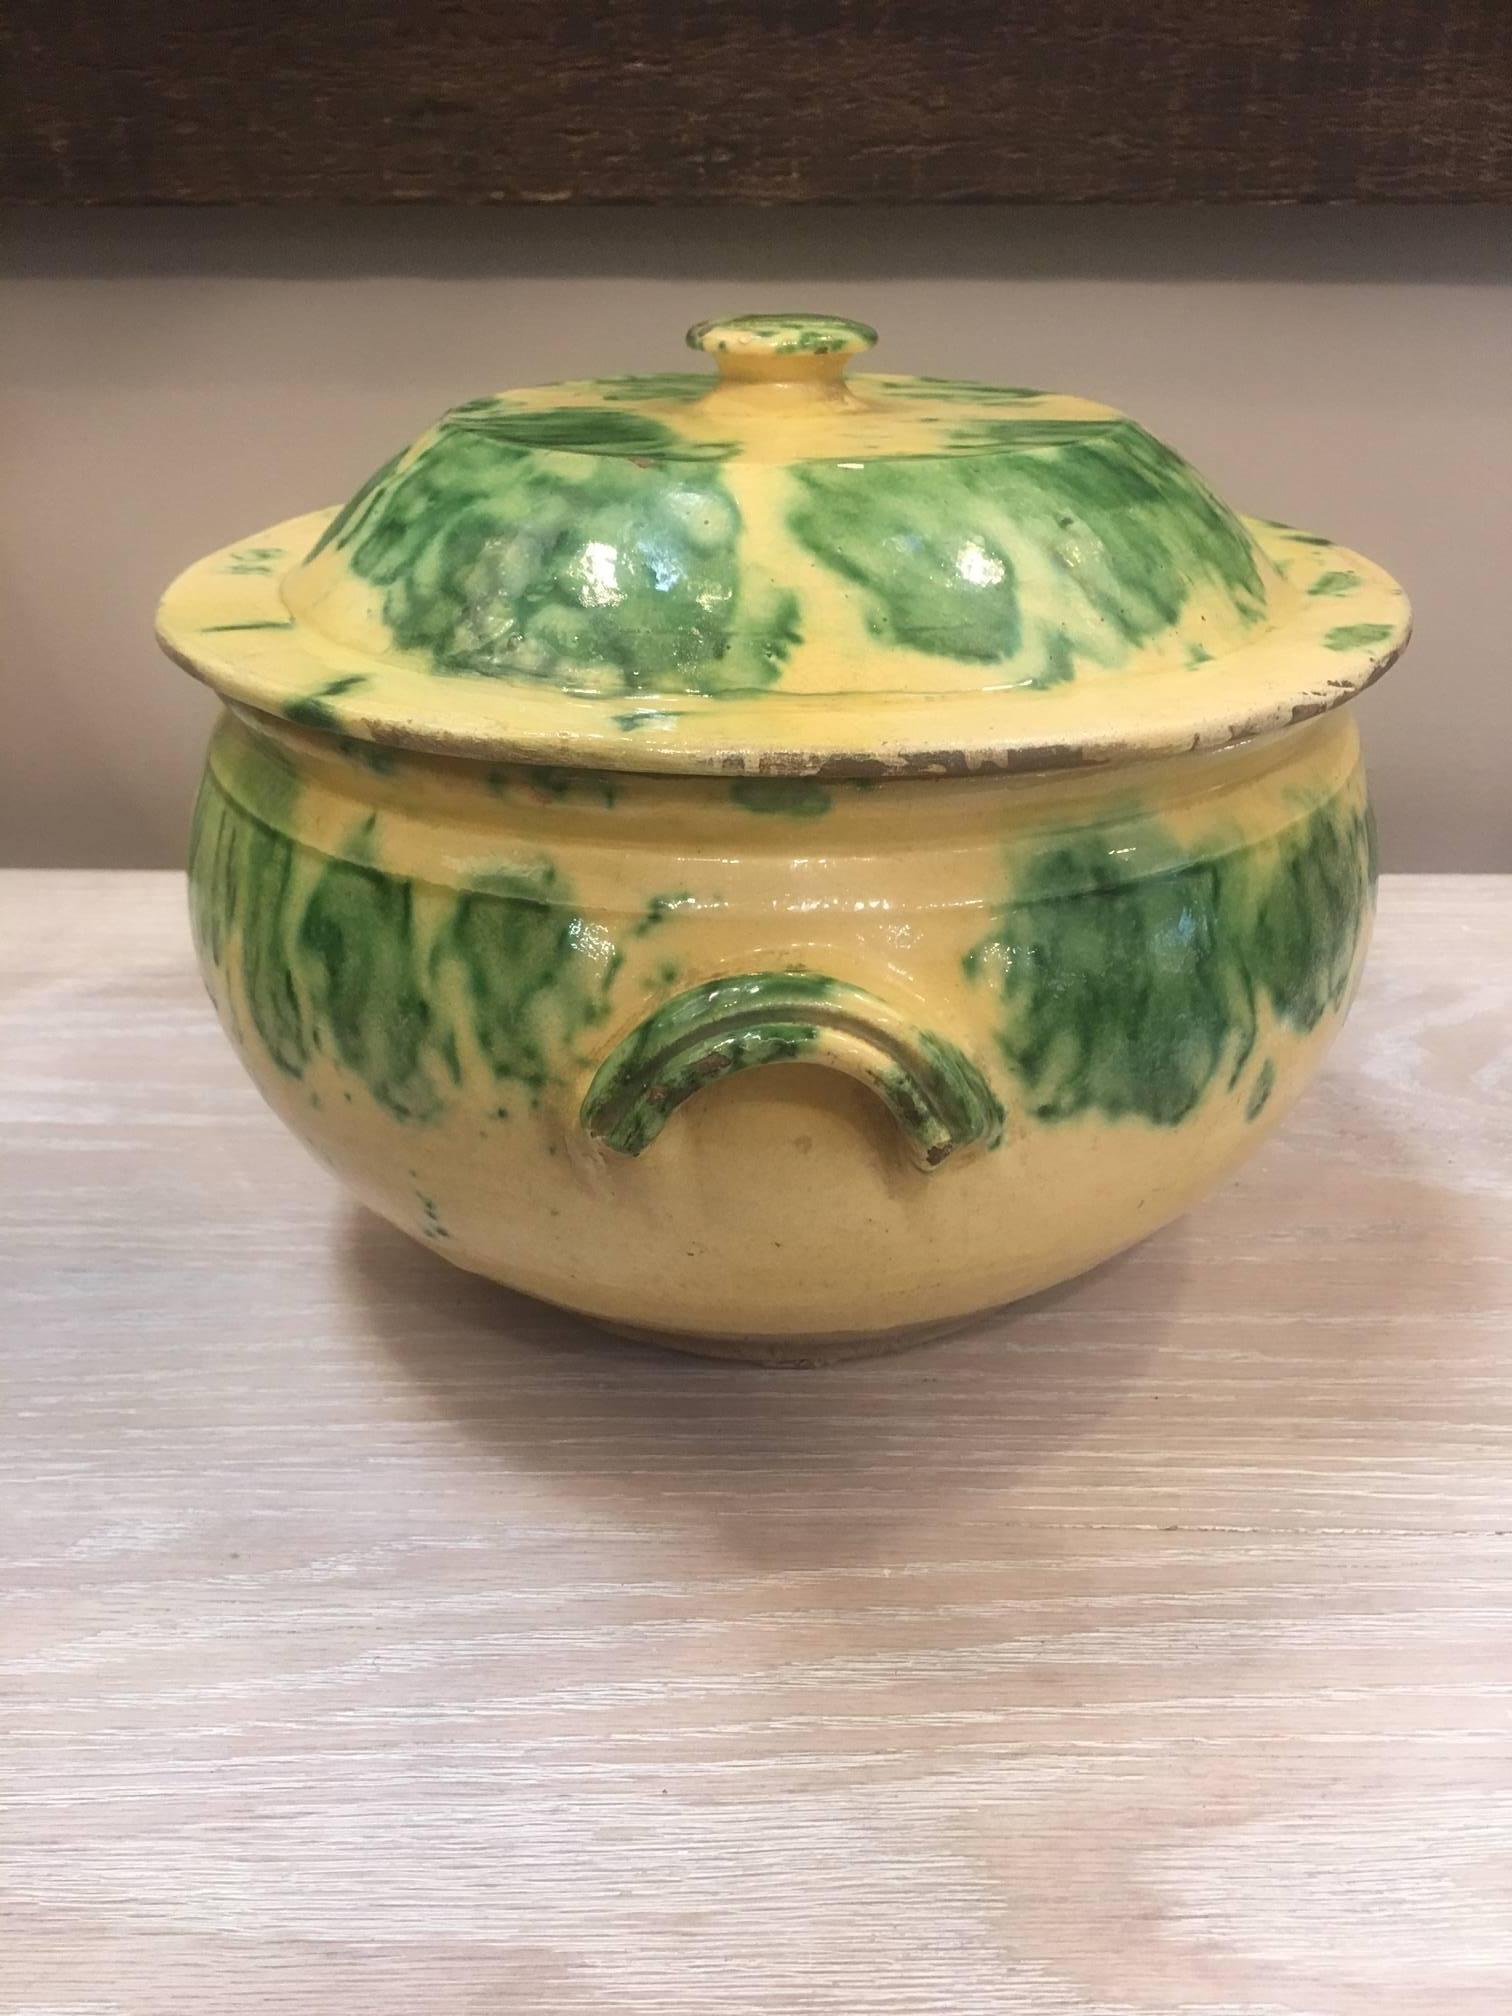 Yellow tureen with green pattern.